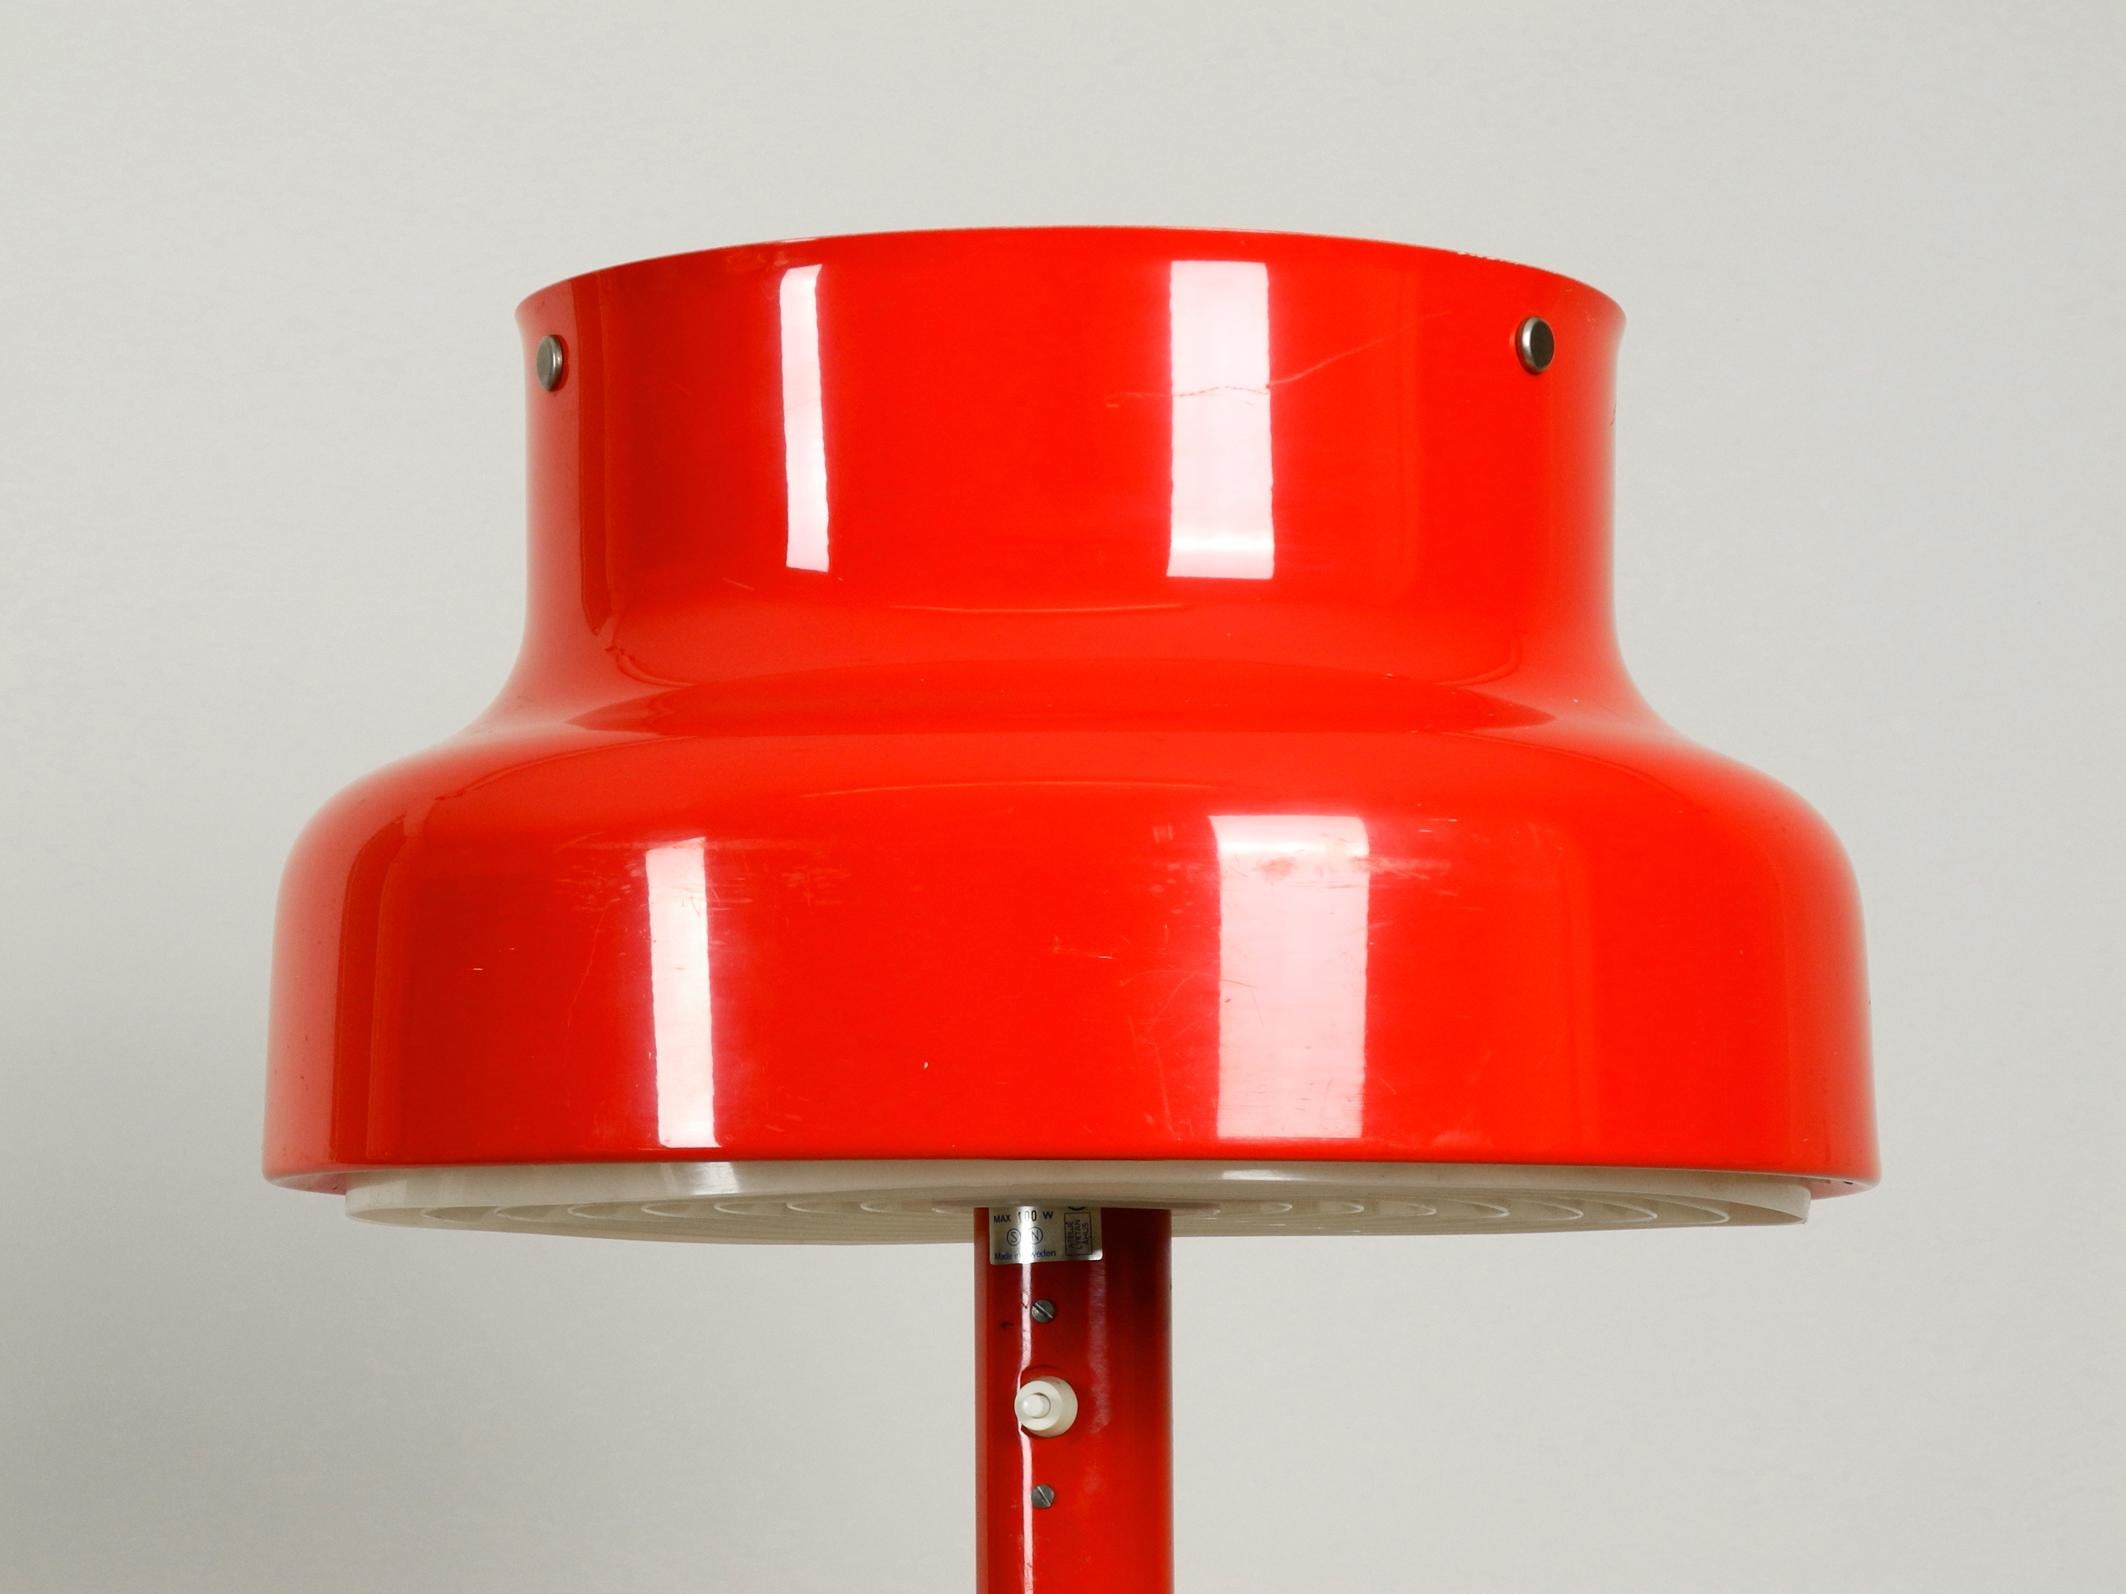 Very nice original 1960s Bumling floor lamp in red.
Shade is painted white on the inside. Designed in 1968 by Anders Pehrson Ateljé Lyktan.
Made in Sweden.
On one side of the shade there are a few light scratches on the paint and one tiny